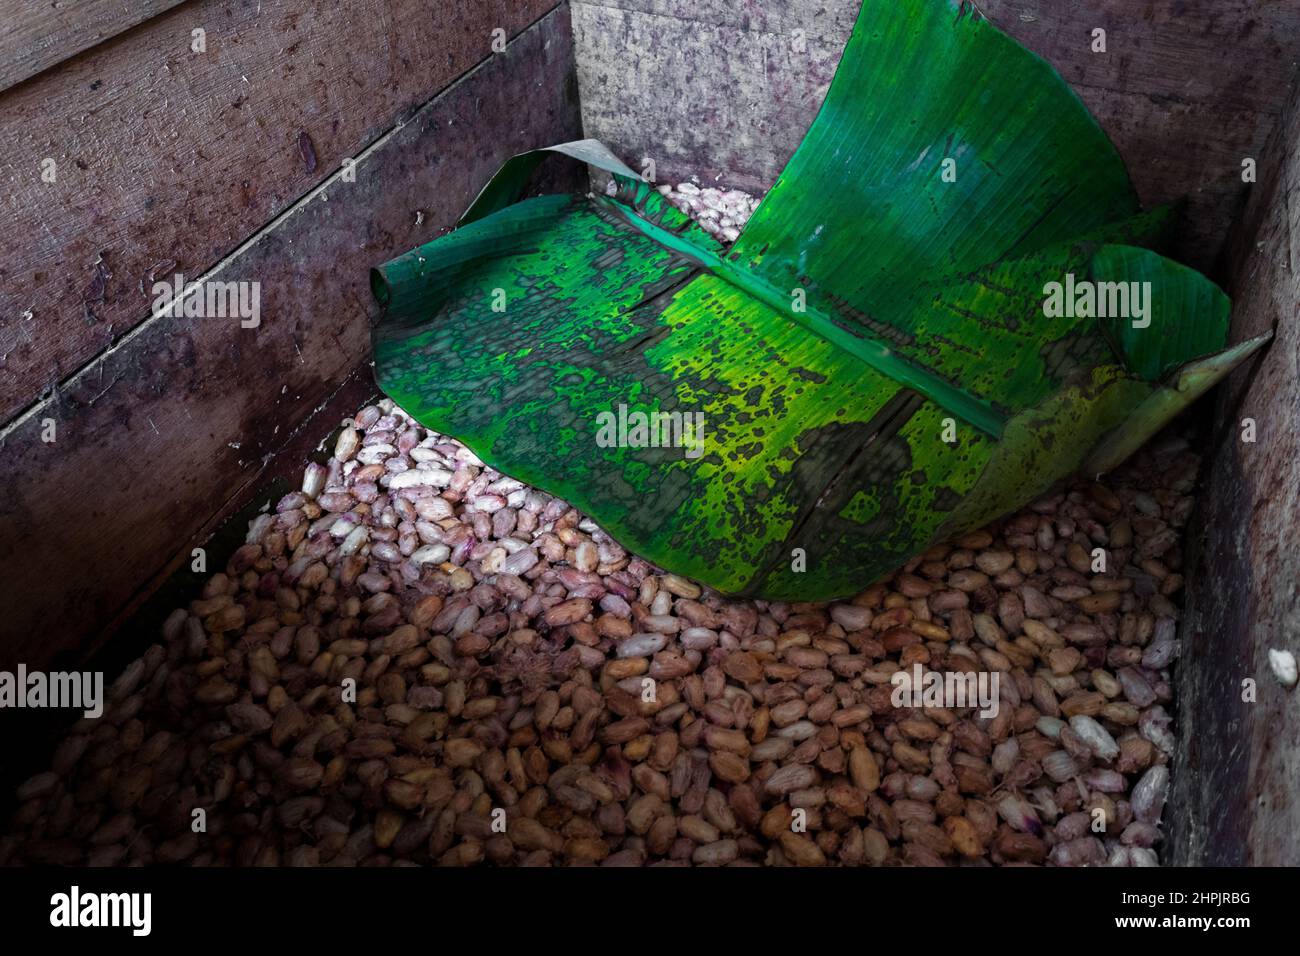 Cacao seeds, covered in pulp and hidden by banana leaves, are seen being fermented in a wooden box on a cacao farm in Cuernavaca, Cauca, Colombia. Stock Photo